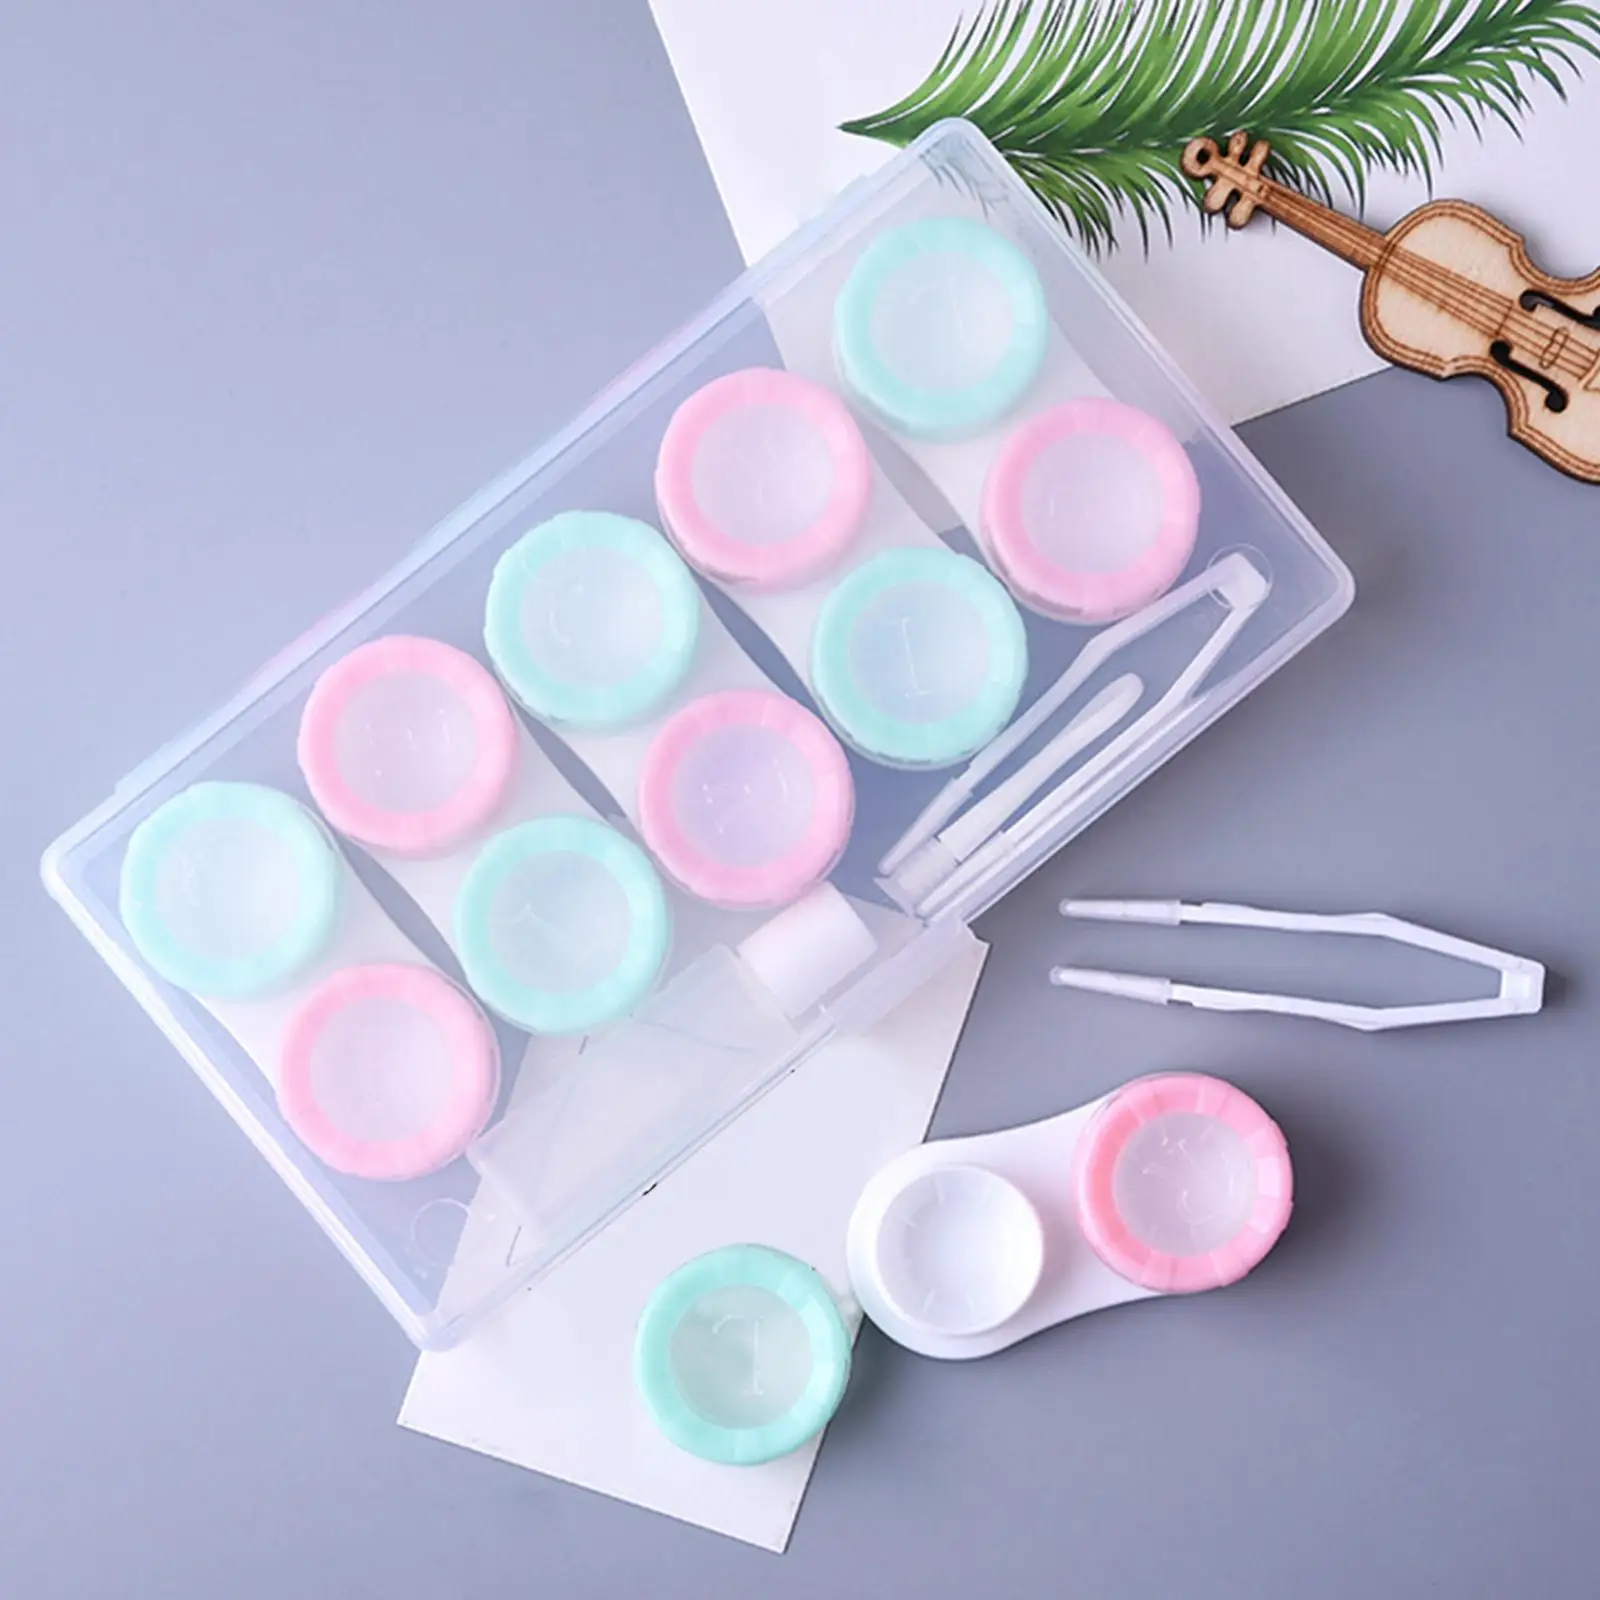 Portable 5 Pair Contact Lens Case Container No Leakage L R Caps Organizer Dual Color Contact Lens Holder for Women Home Outdoor